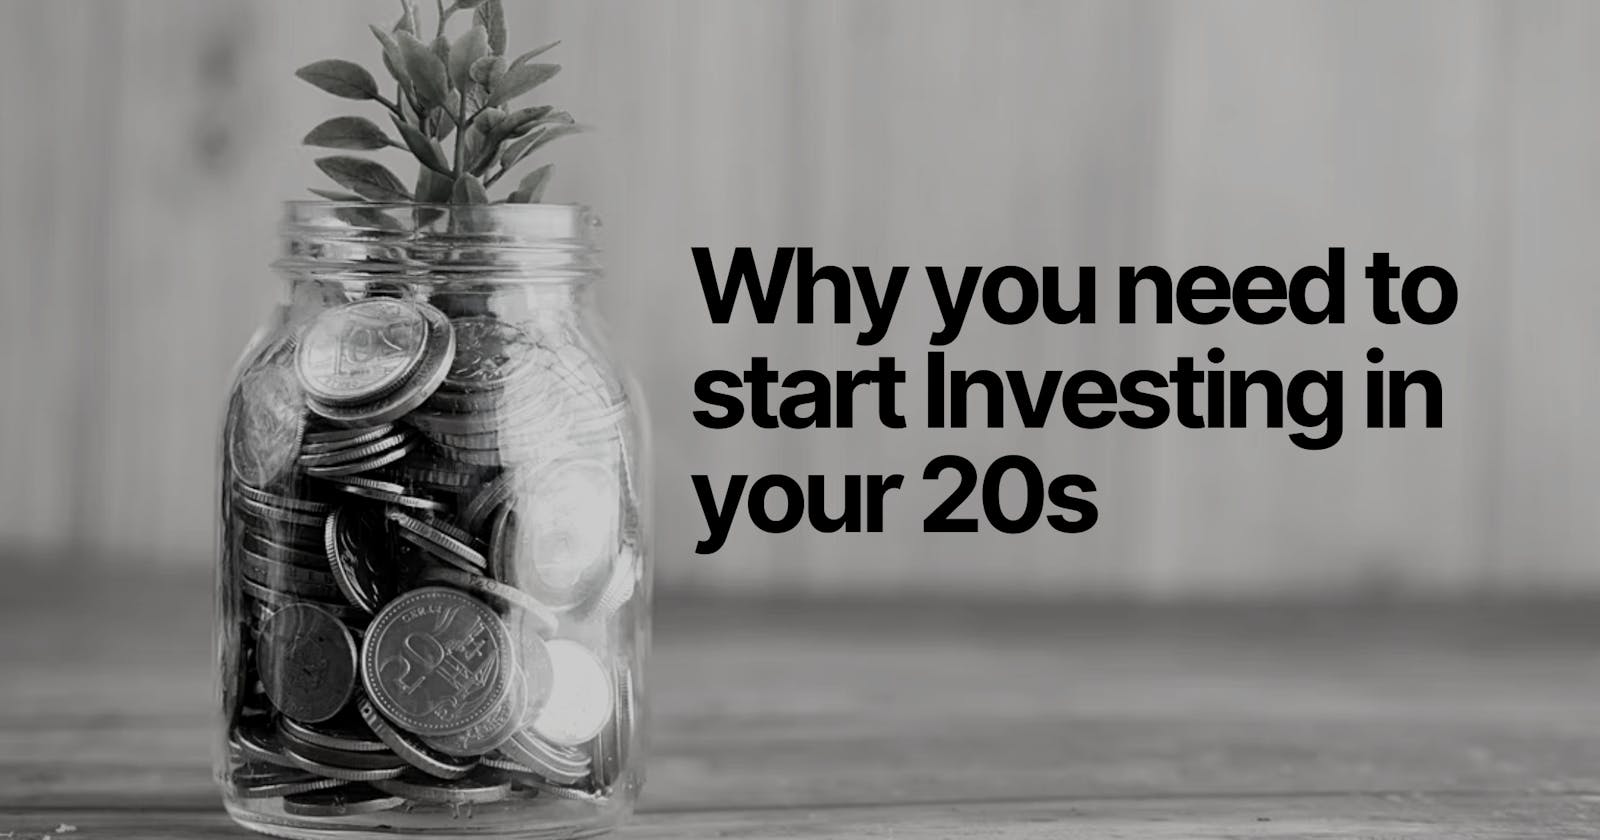 Why you need to start investing in your 20s